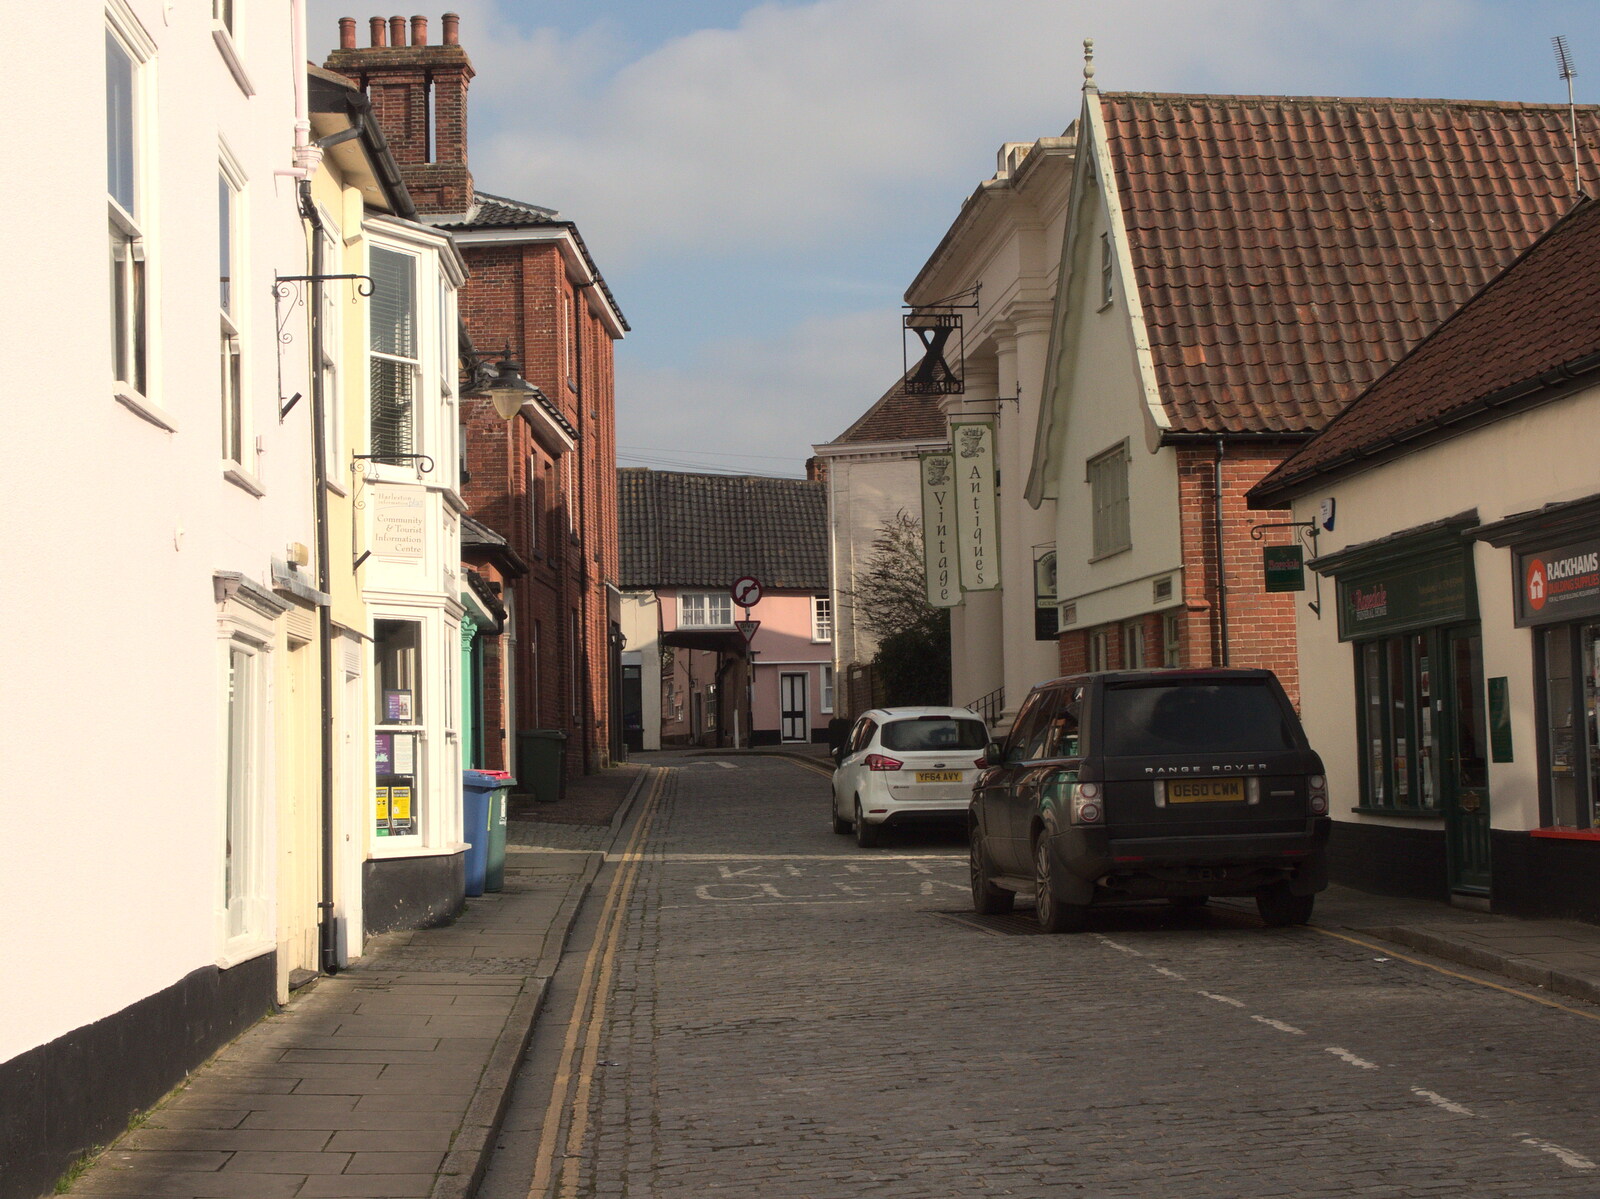 Exchange Street from A Vaccine Postcard from Harleston, Norfolk - 22nd March 2021